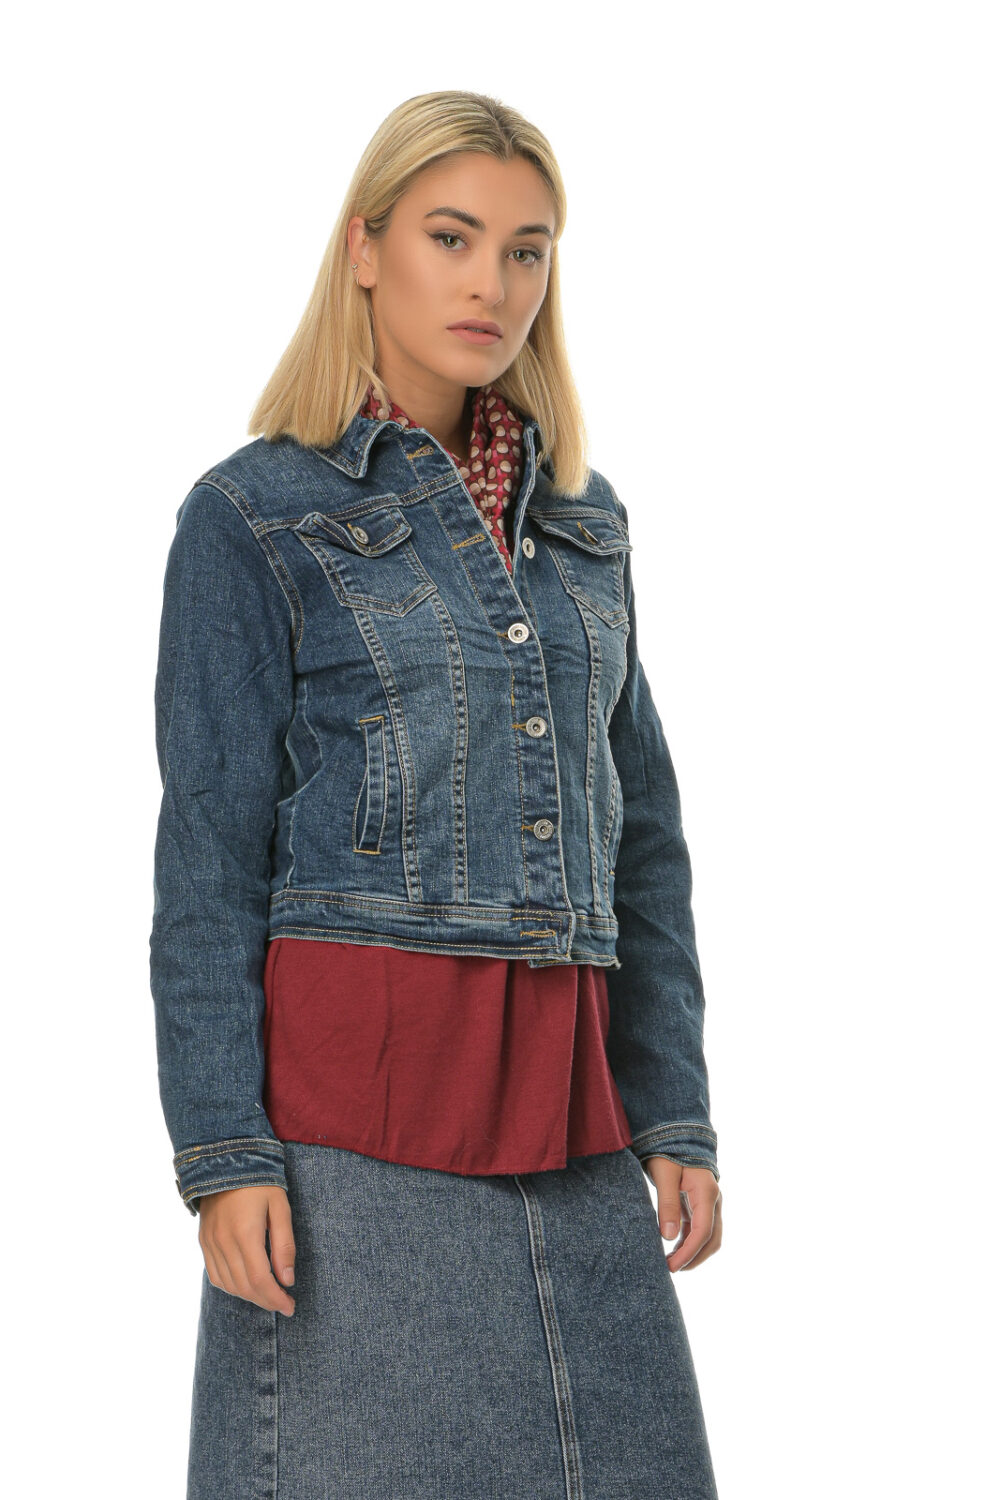 Blue denim short jacket with pockets and buttons